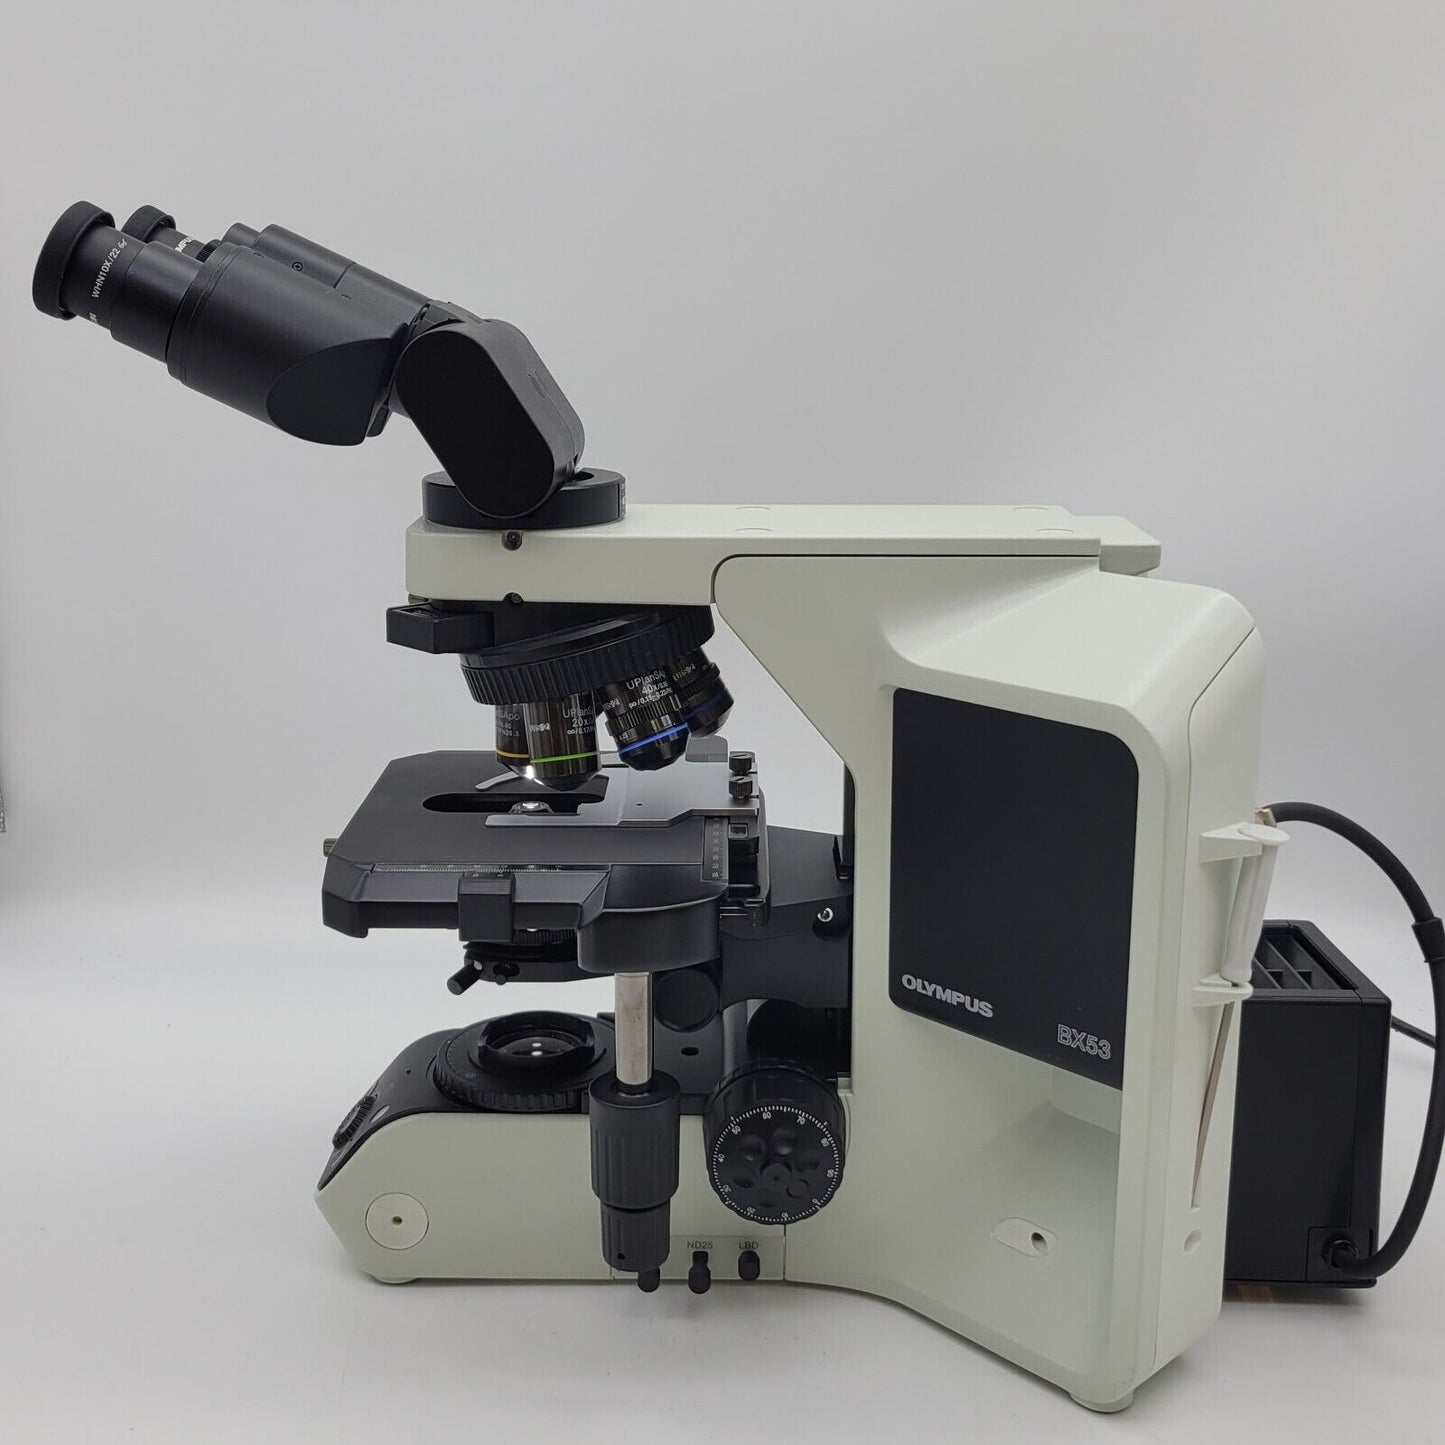 Olympus Microscope BX53 with 2x, Apo Objectives and Tilting Head for Pathology - microscopemarketplace